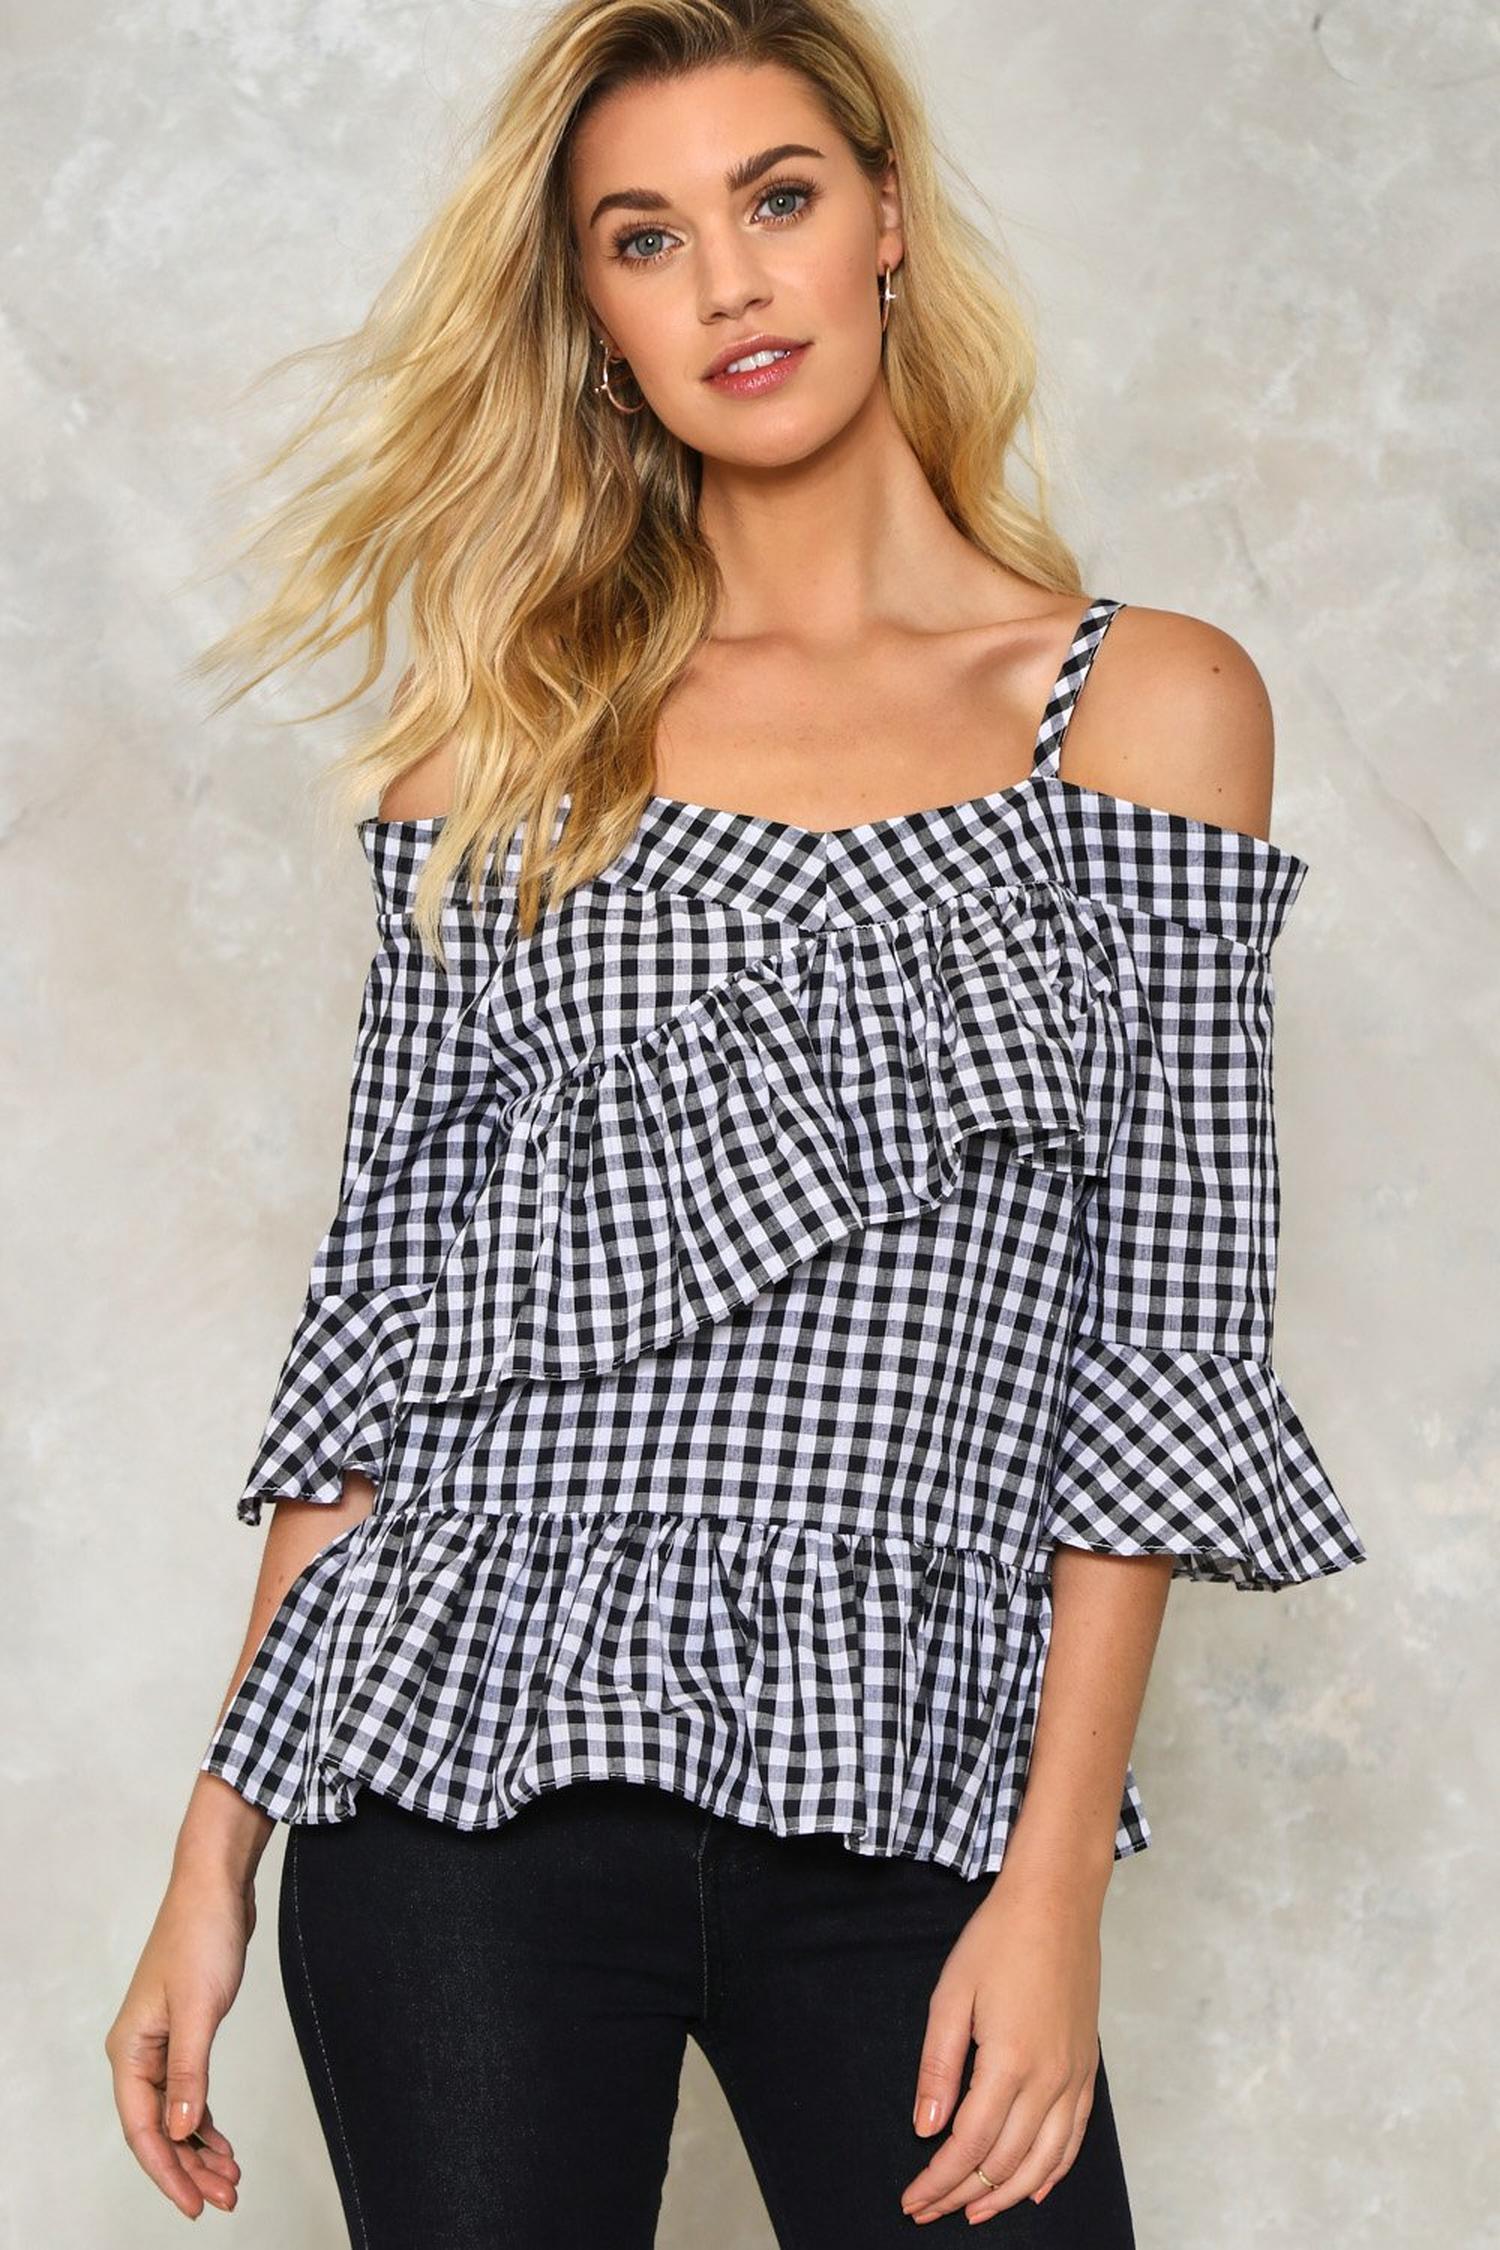 Check You Later Gingham Top | Nasty Gal